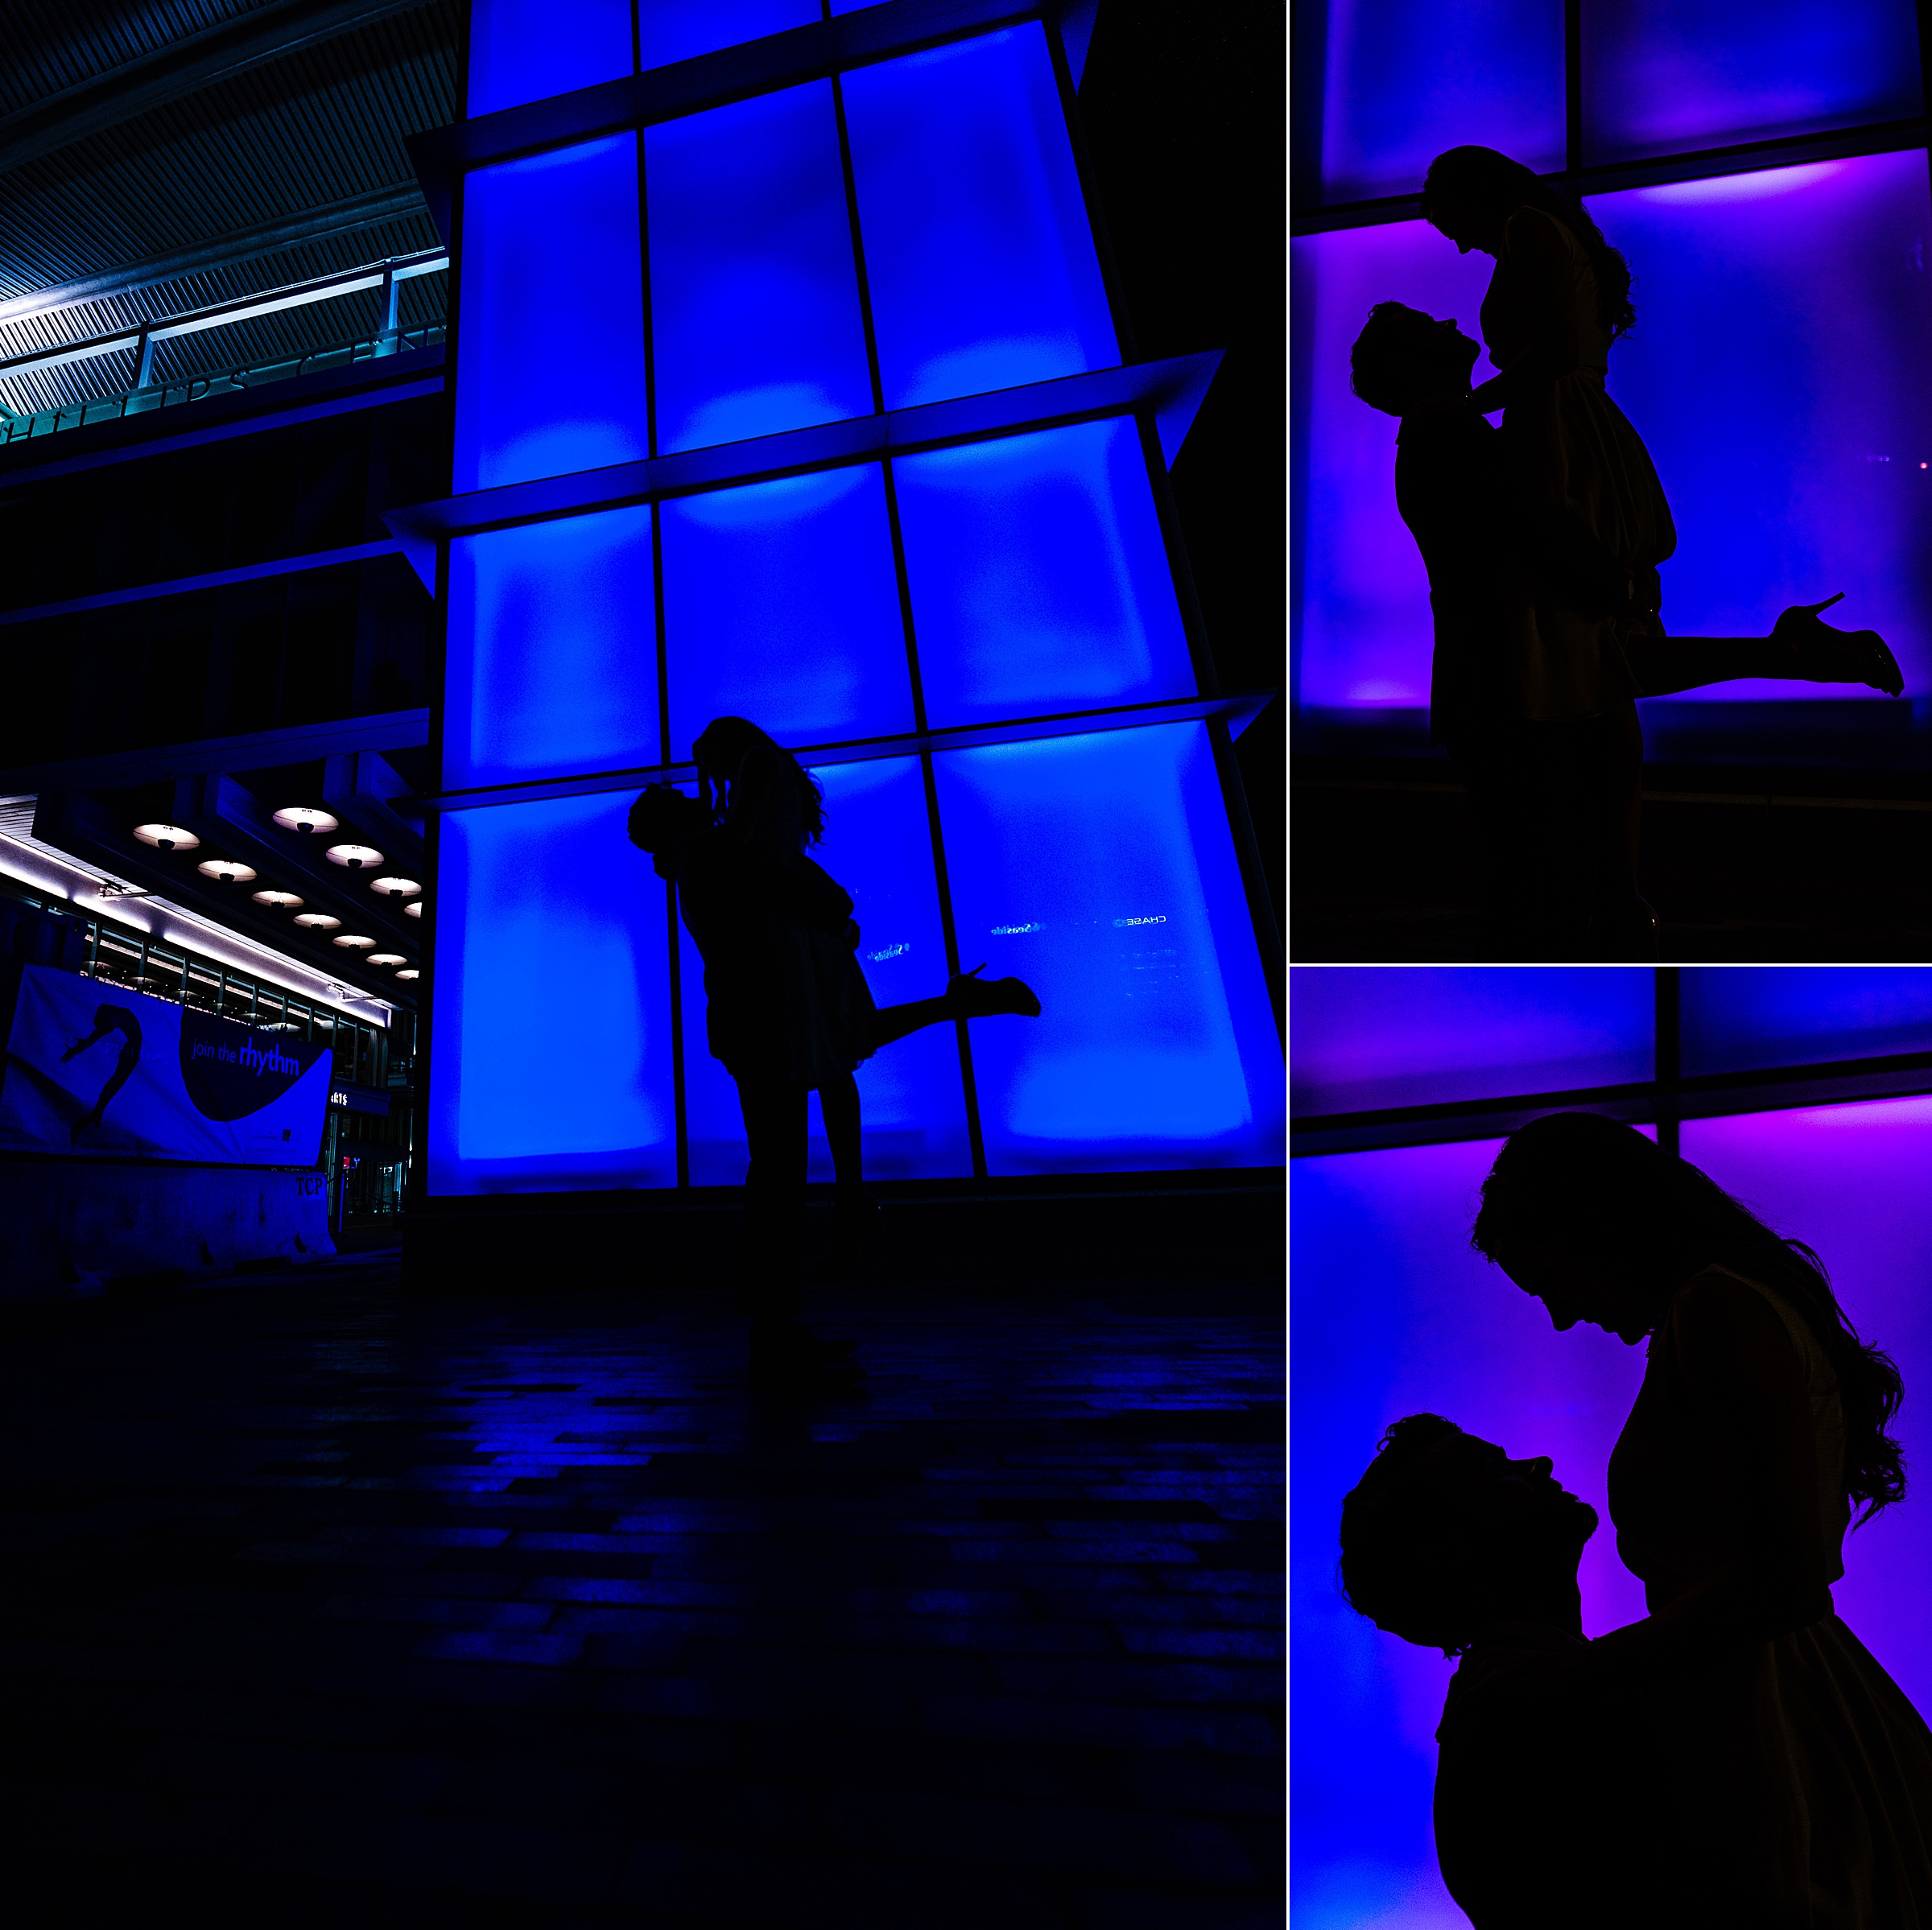 Couple silhouetted in front of a blue and purple light wall | kivusandcamera.com